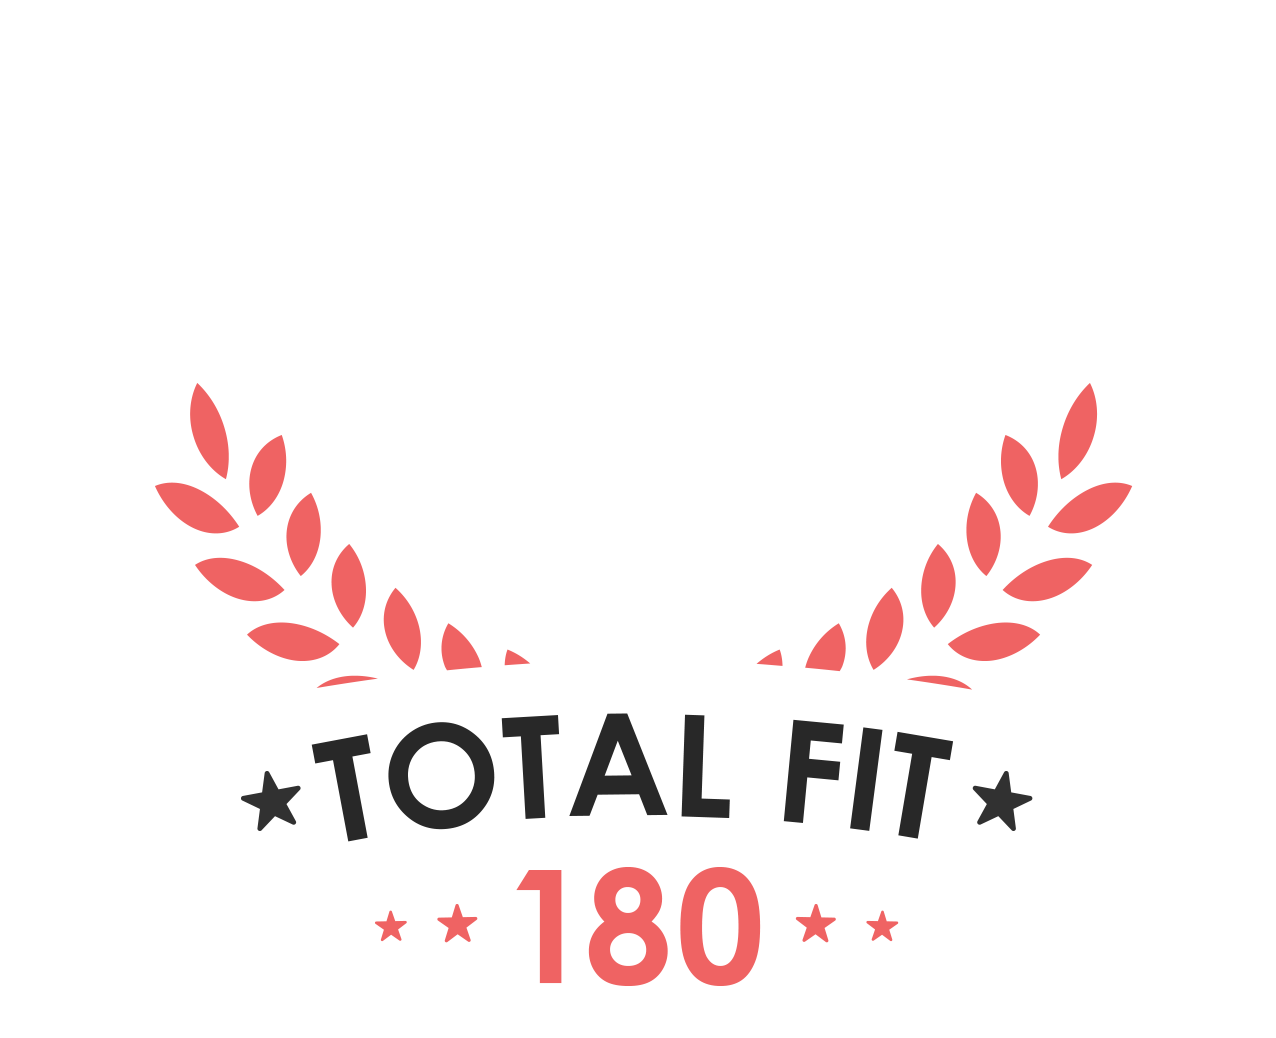 Total Fit 180